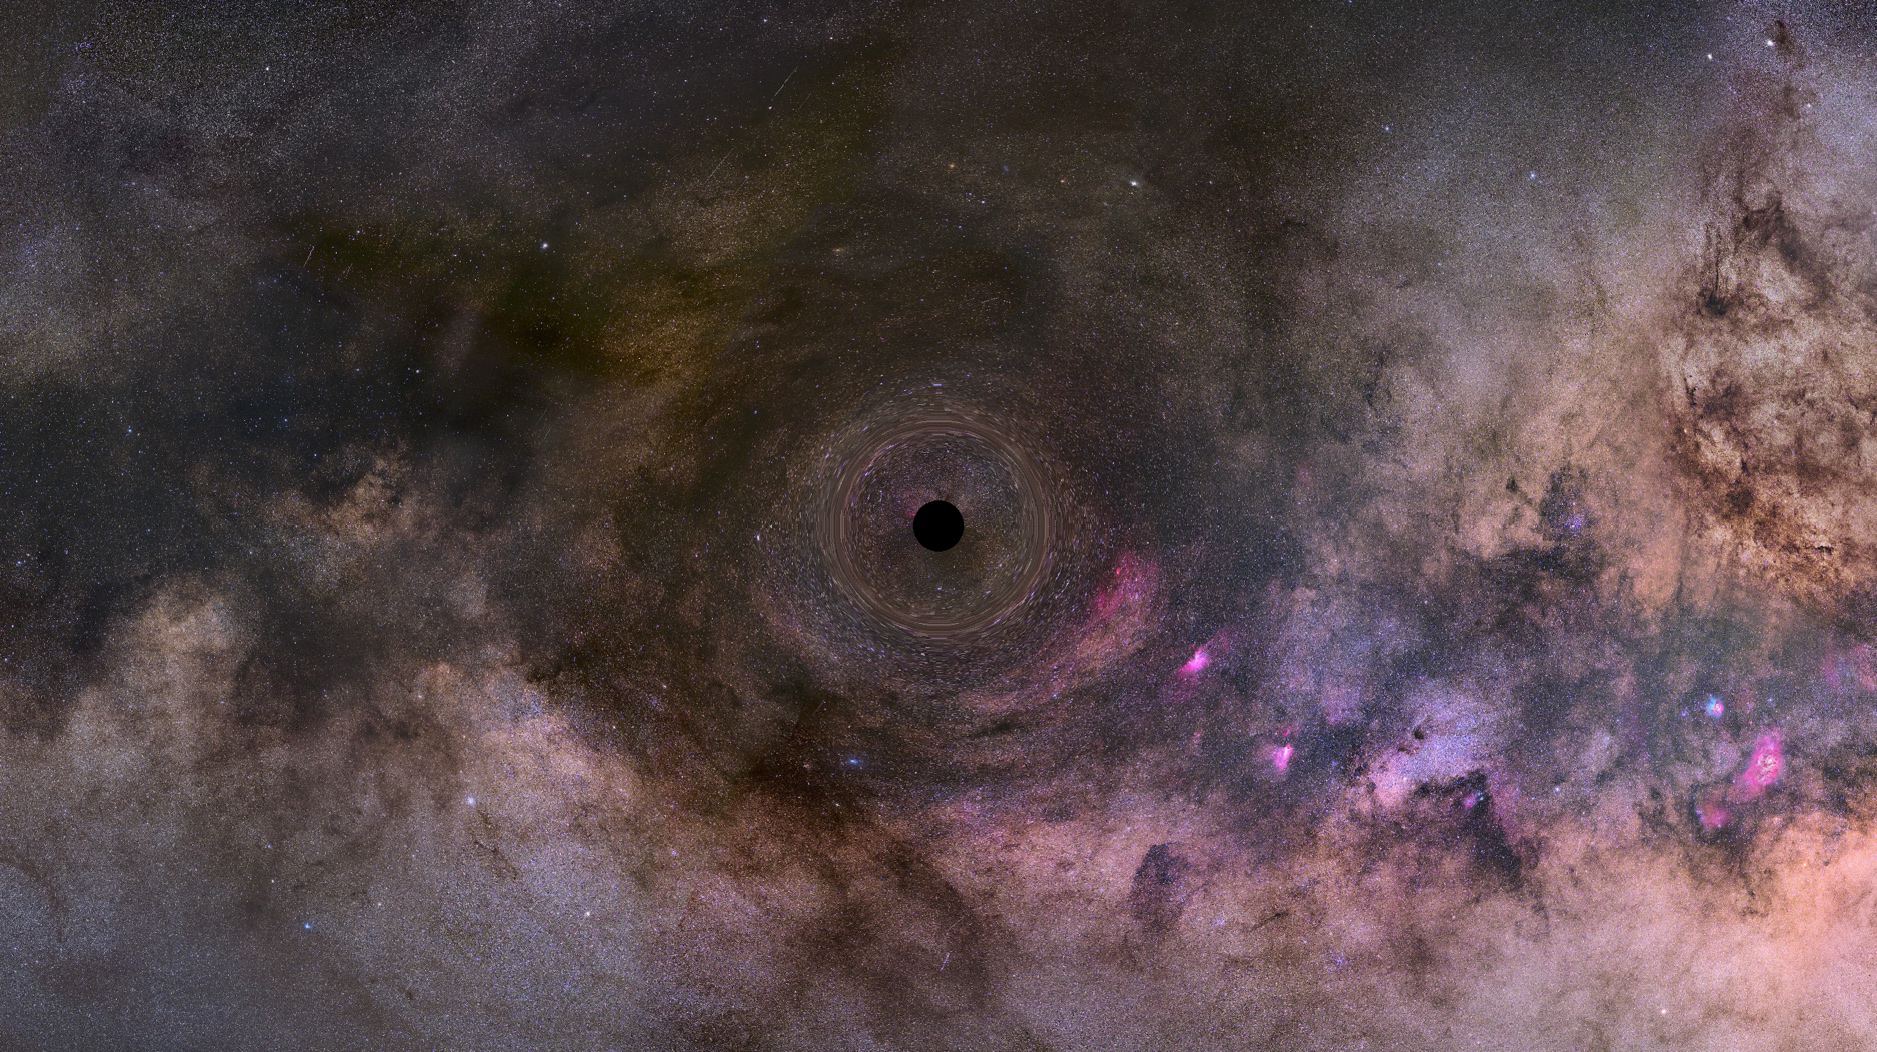 Black holes or galaxies - What came first?